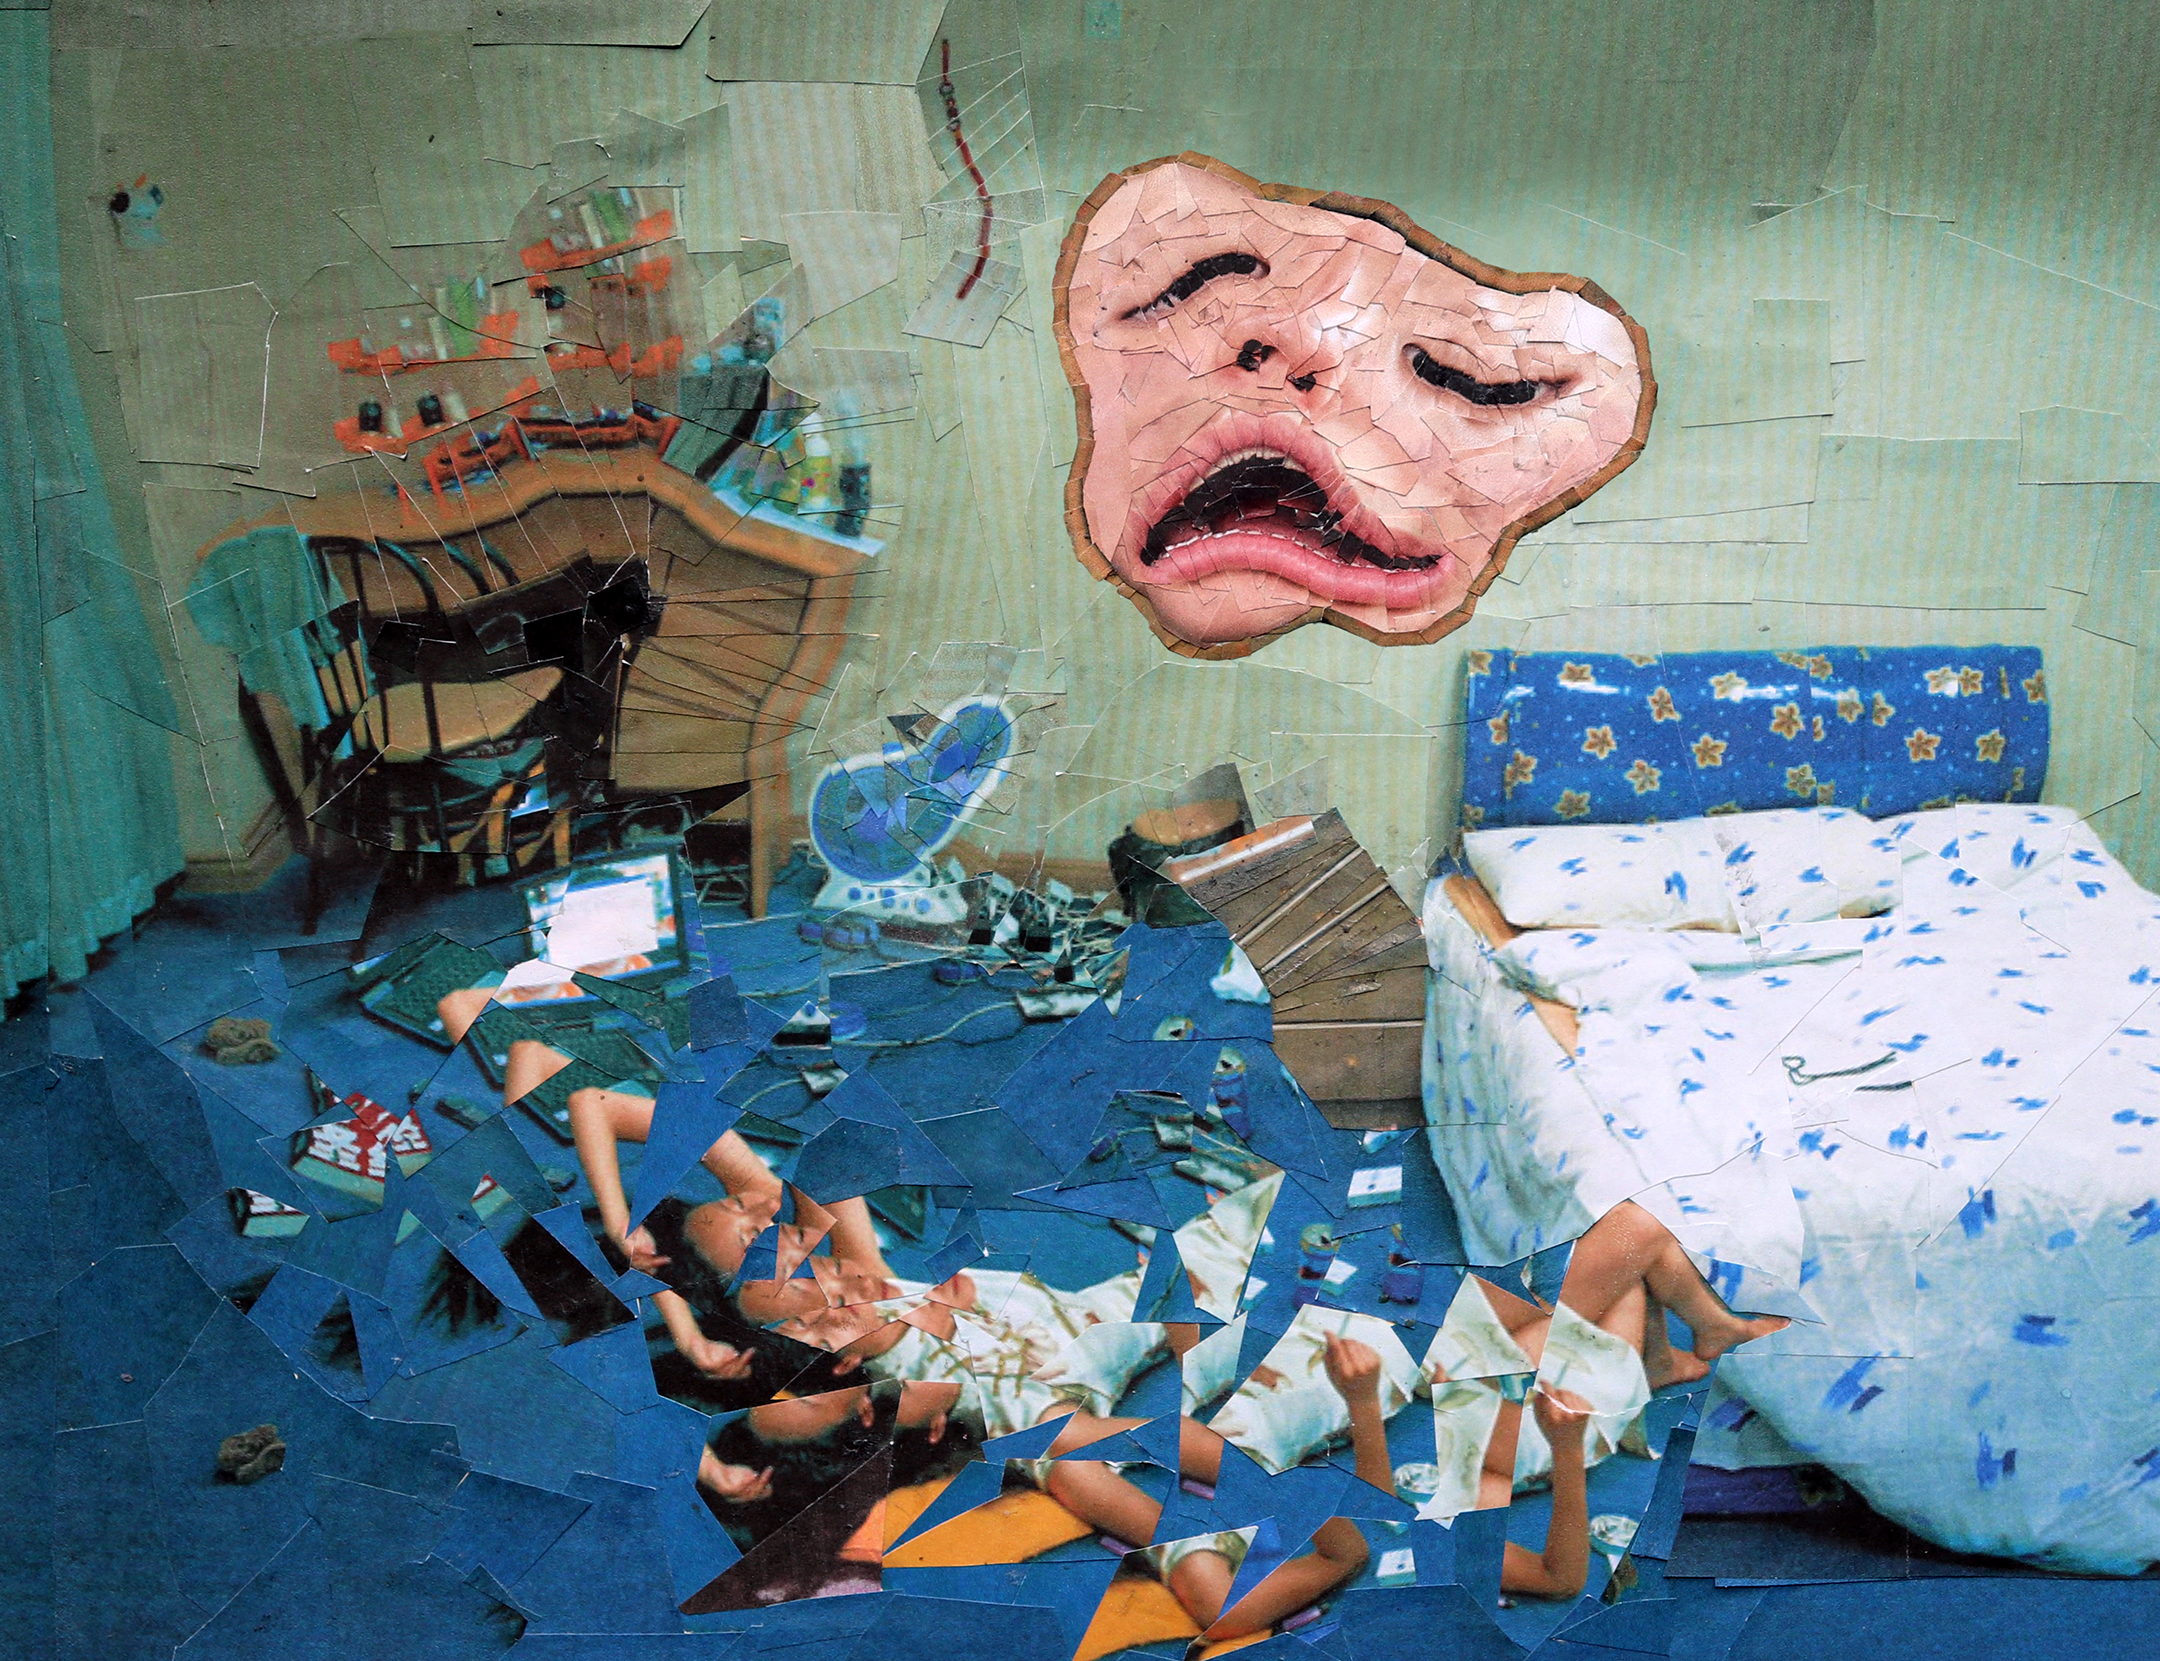 collage depicting a bedroom in disarray with a floating distorted face in the center-right of the image